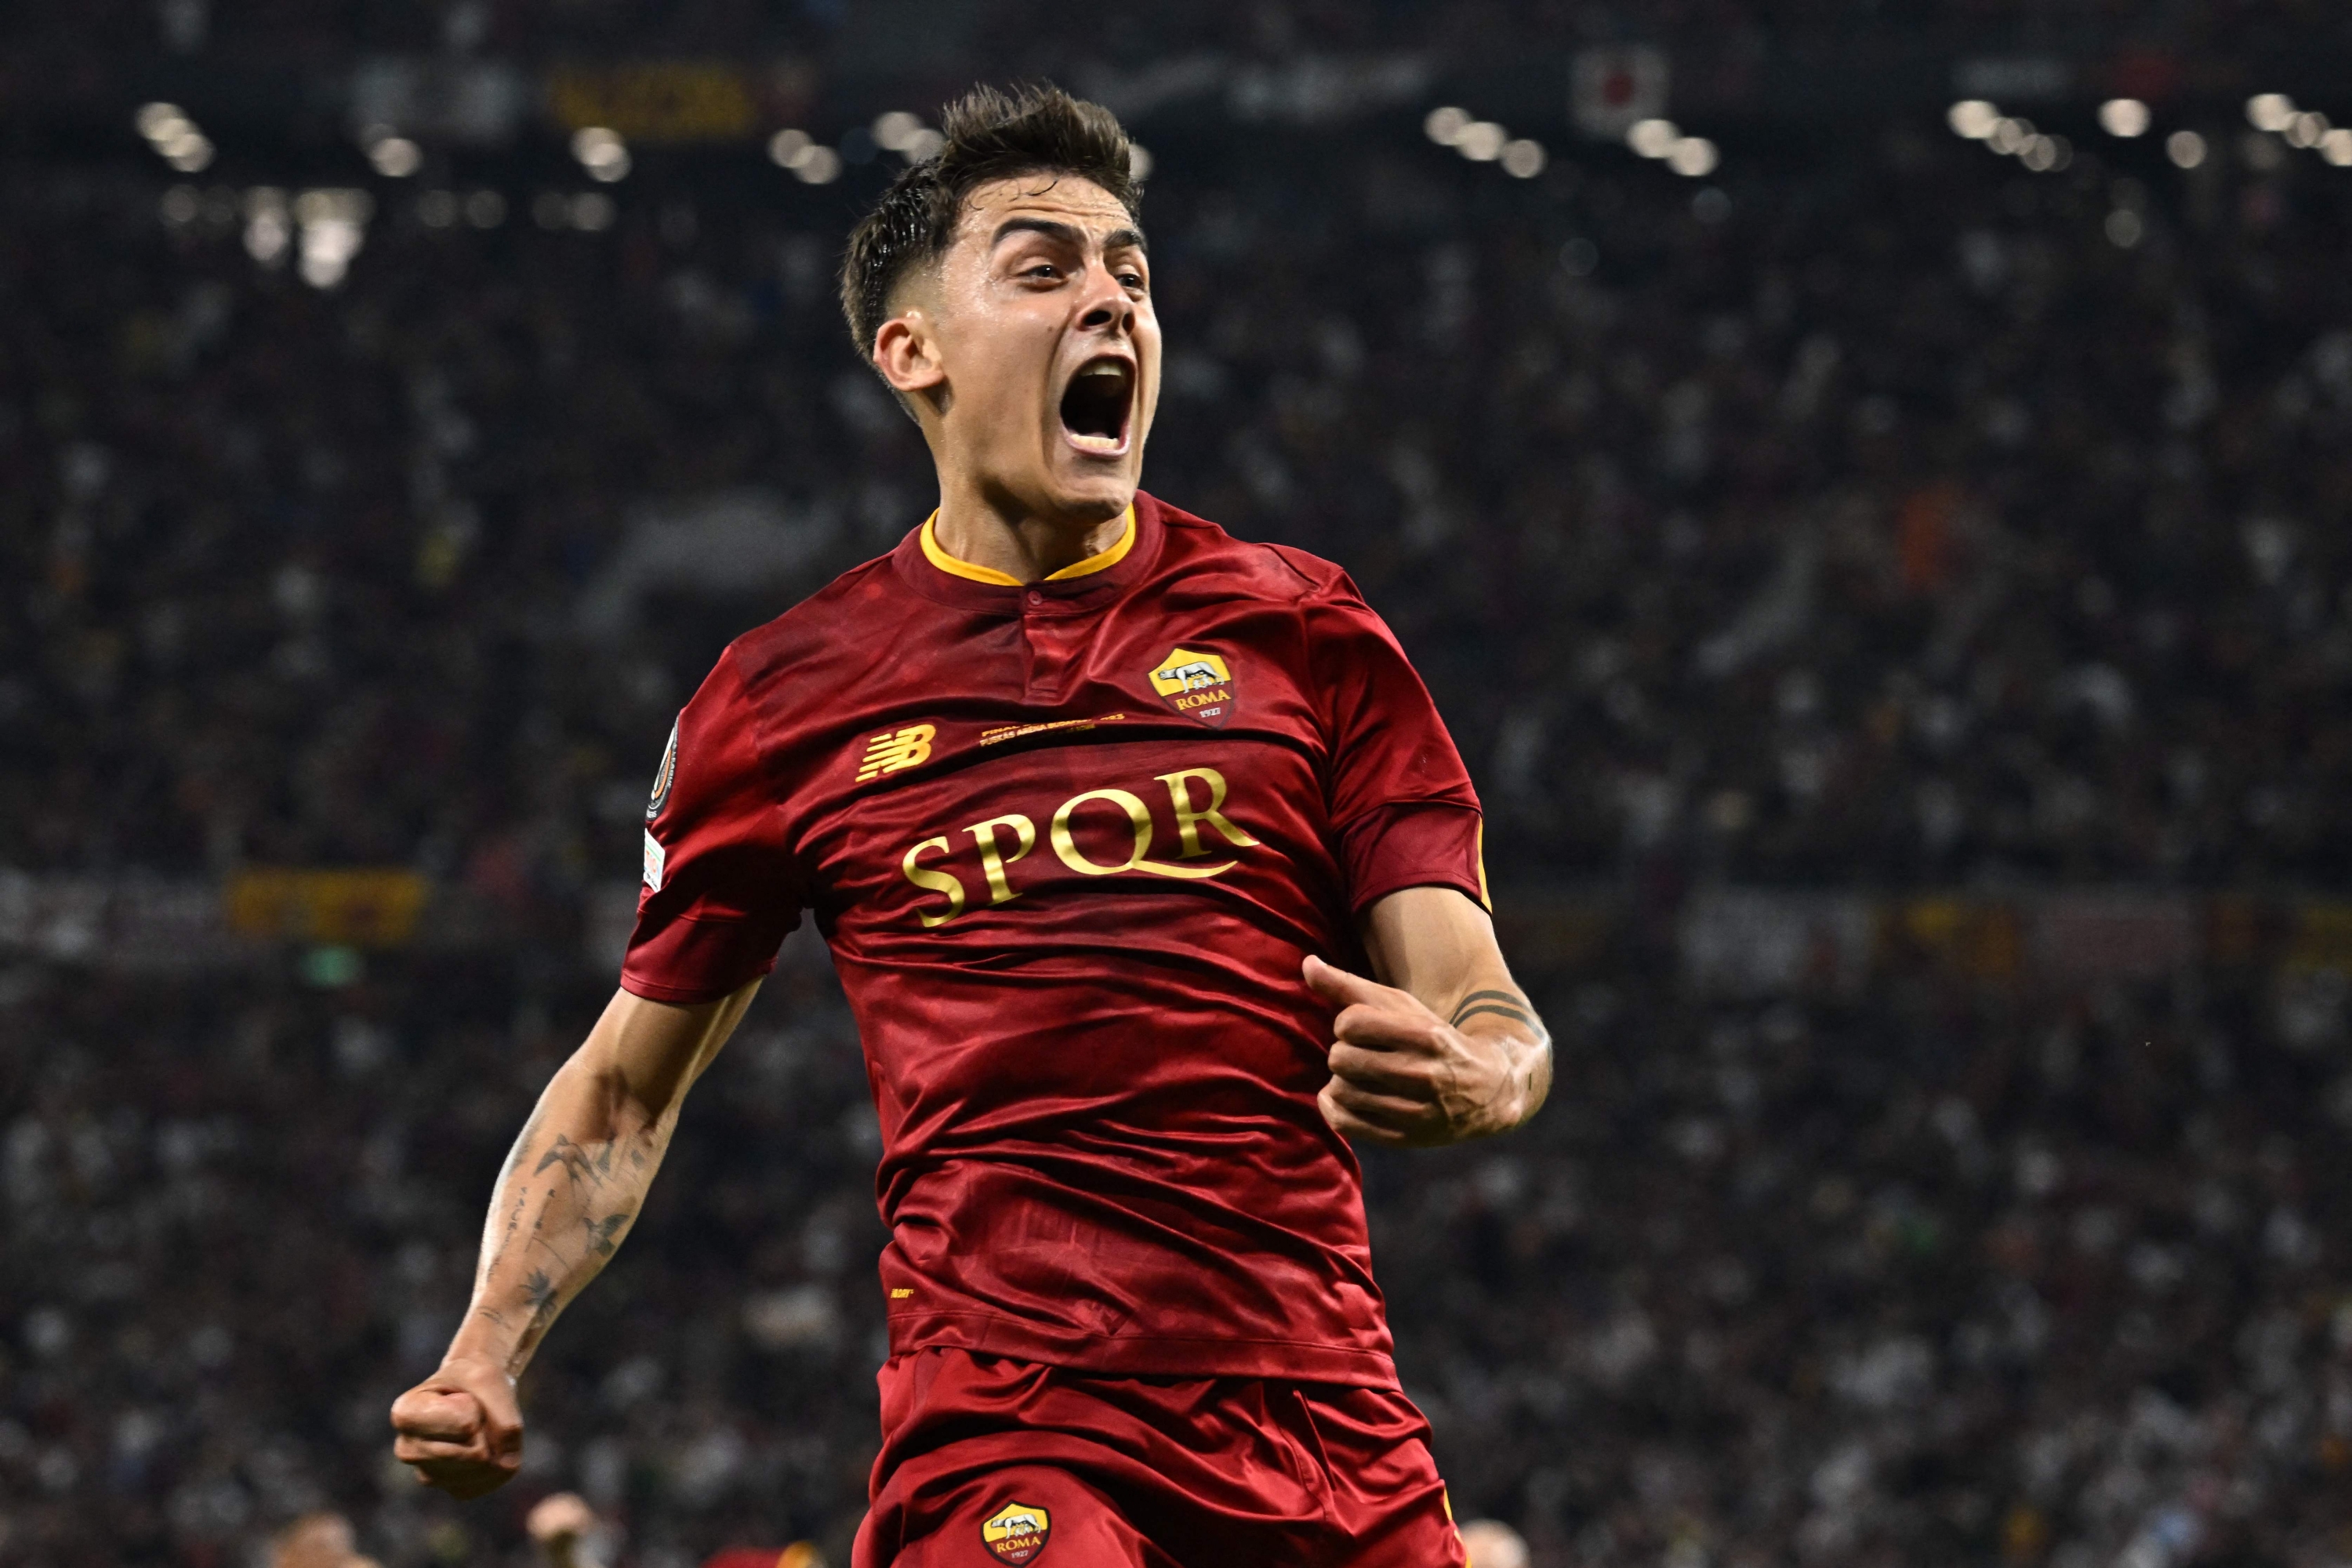 TOPSHOT - AS Roma's Argentinian forward Paulo Dybala celebrates scoring the opening goal during the UEFA Europa League final football match between Sevilla FC and AS Roma at the Puskas Arena in Budapest, Hungary on May 31, 2023. (Photo by Attila KISBENEDEK / AFP)